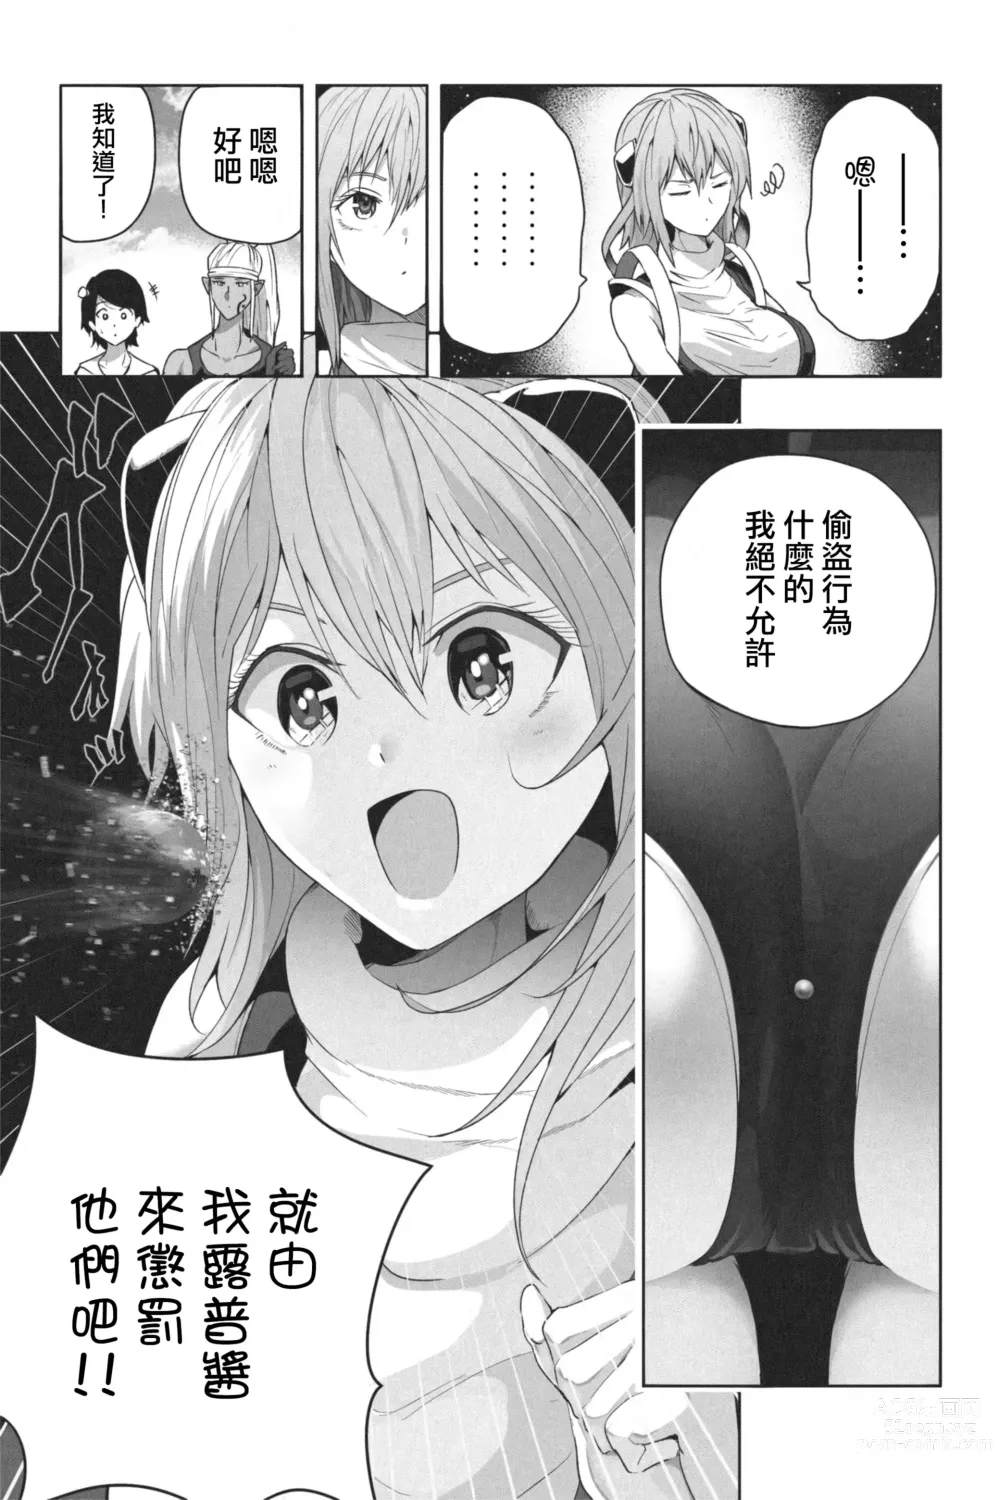 Page 17 of doujinshi NEW Chikyuu de Asobo - NEW Play with earth